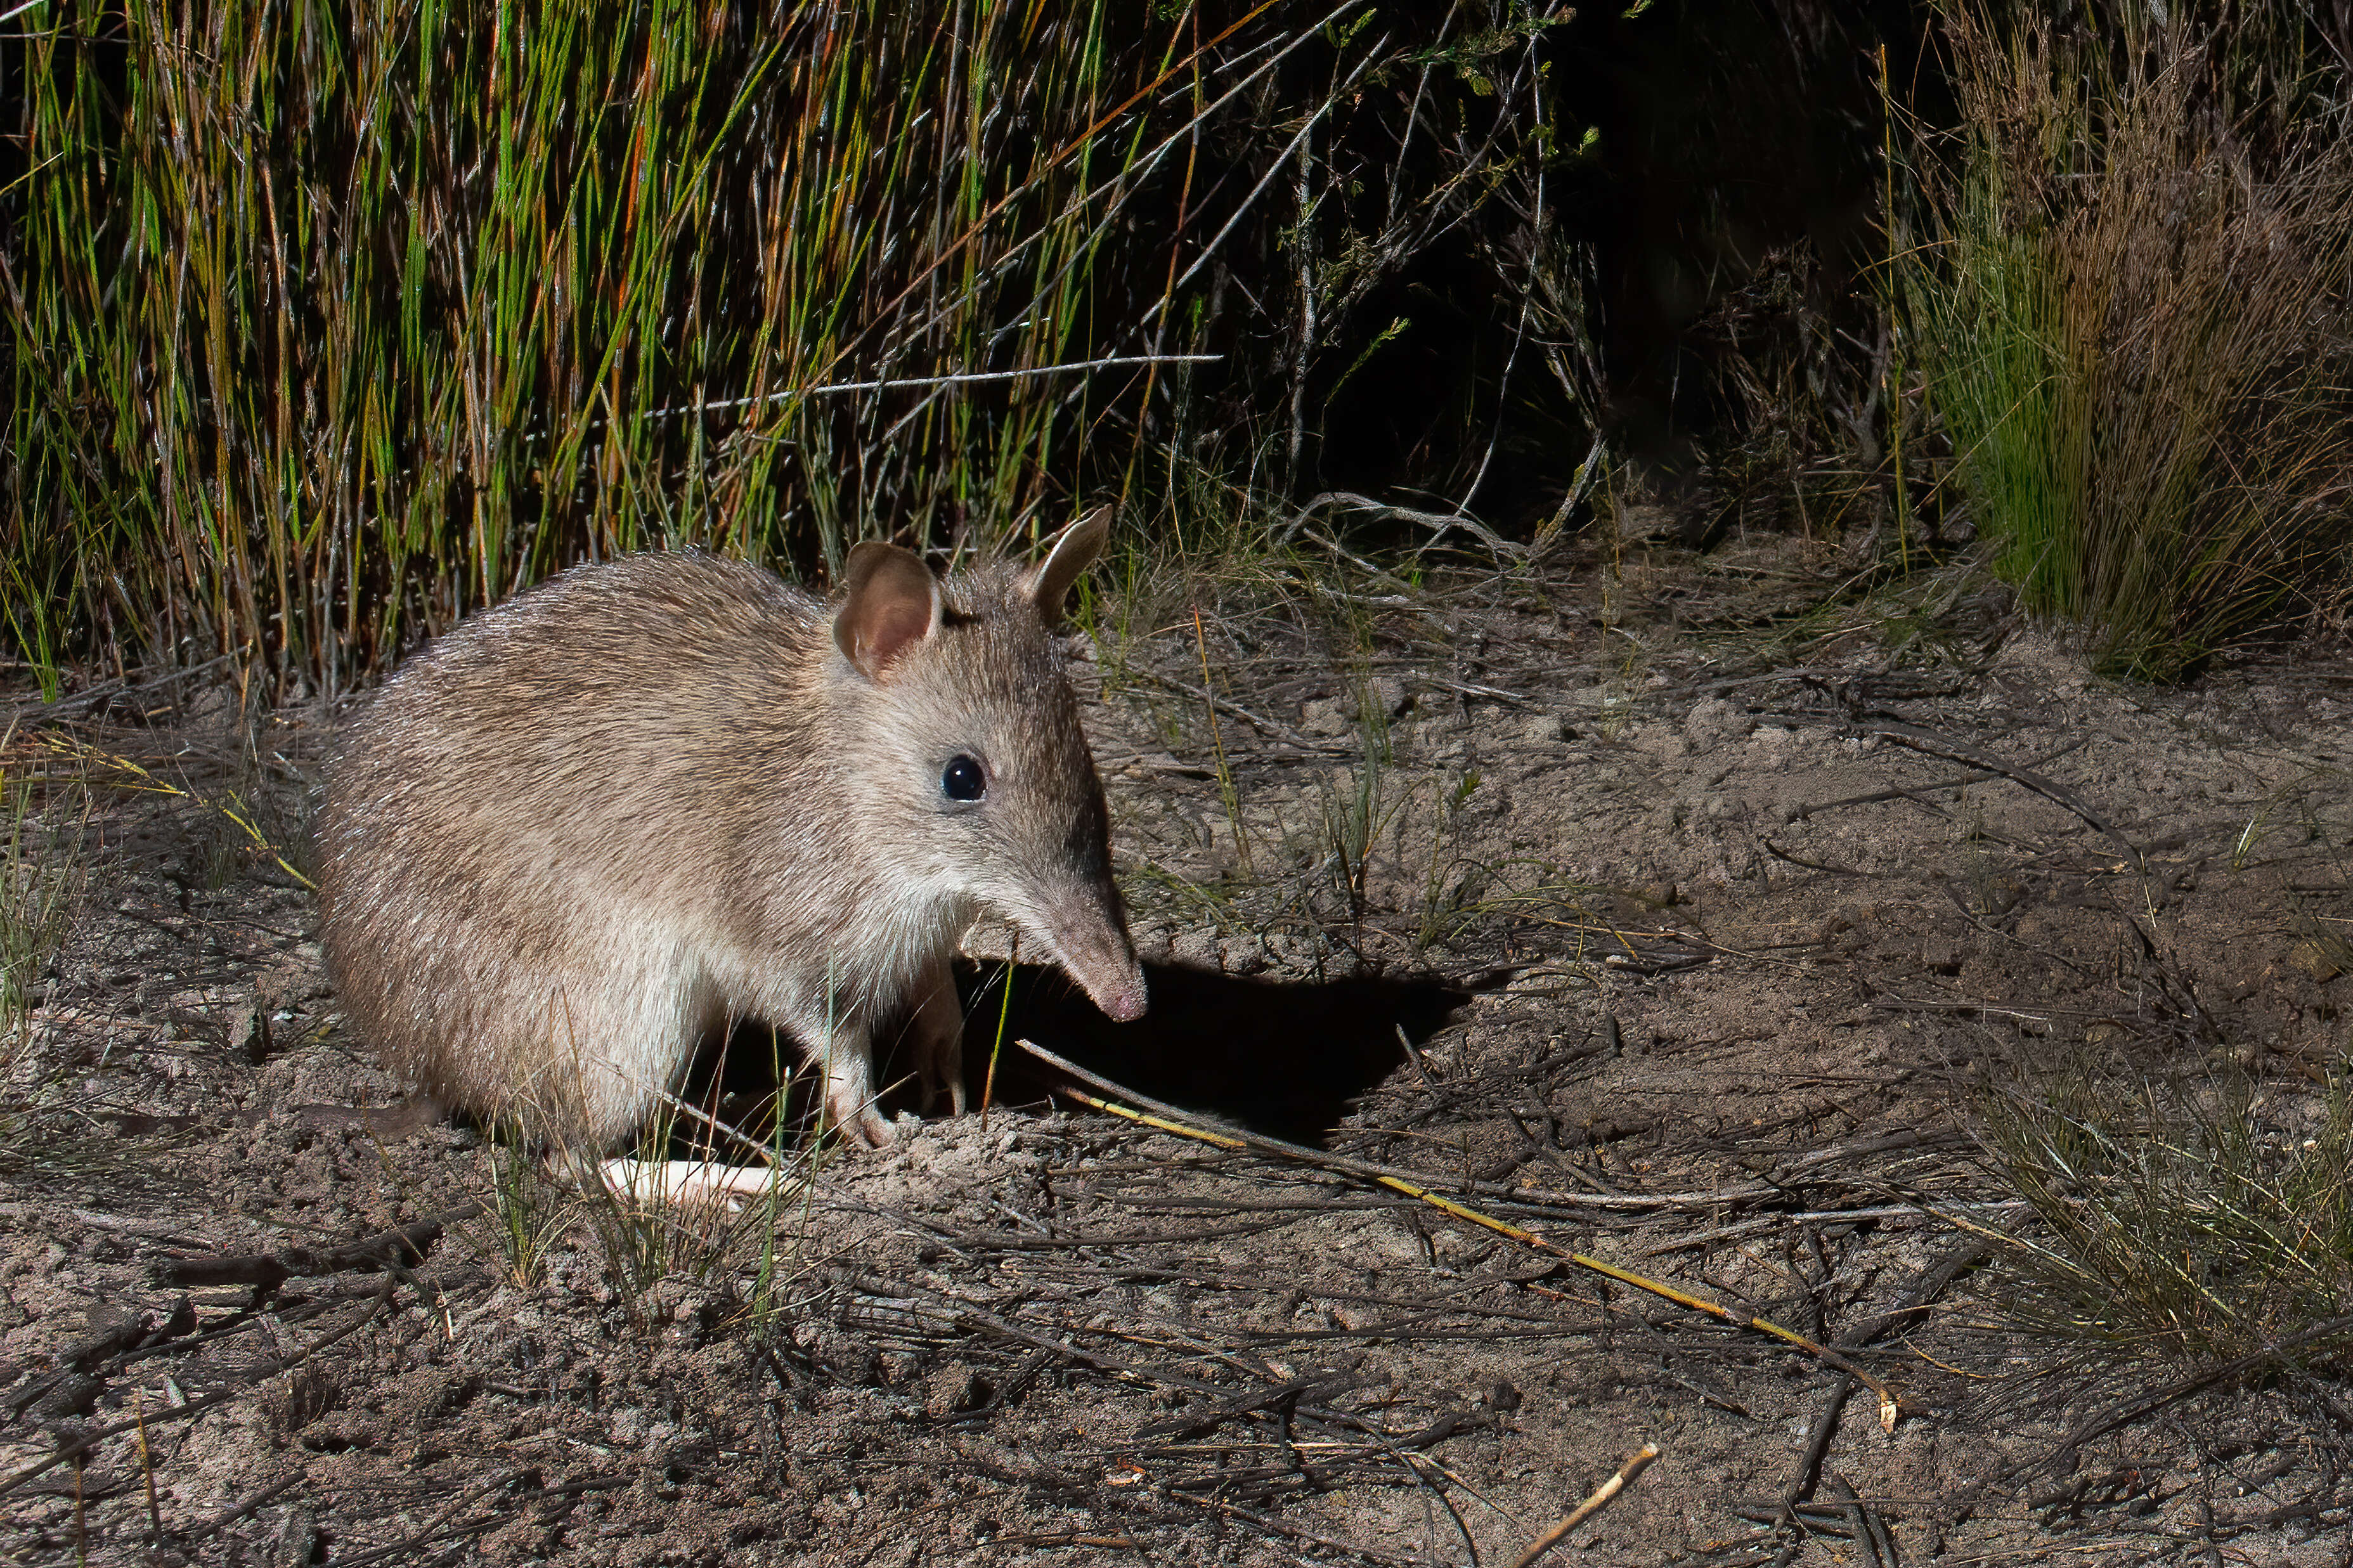 Image of Long-nosed Bandicoot